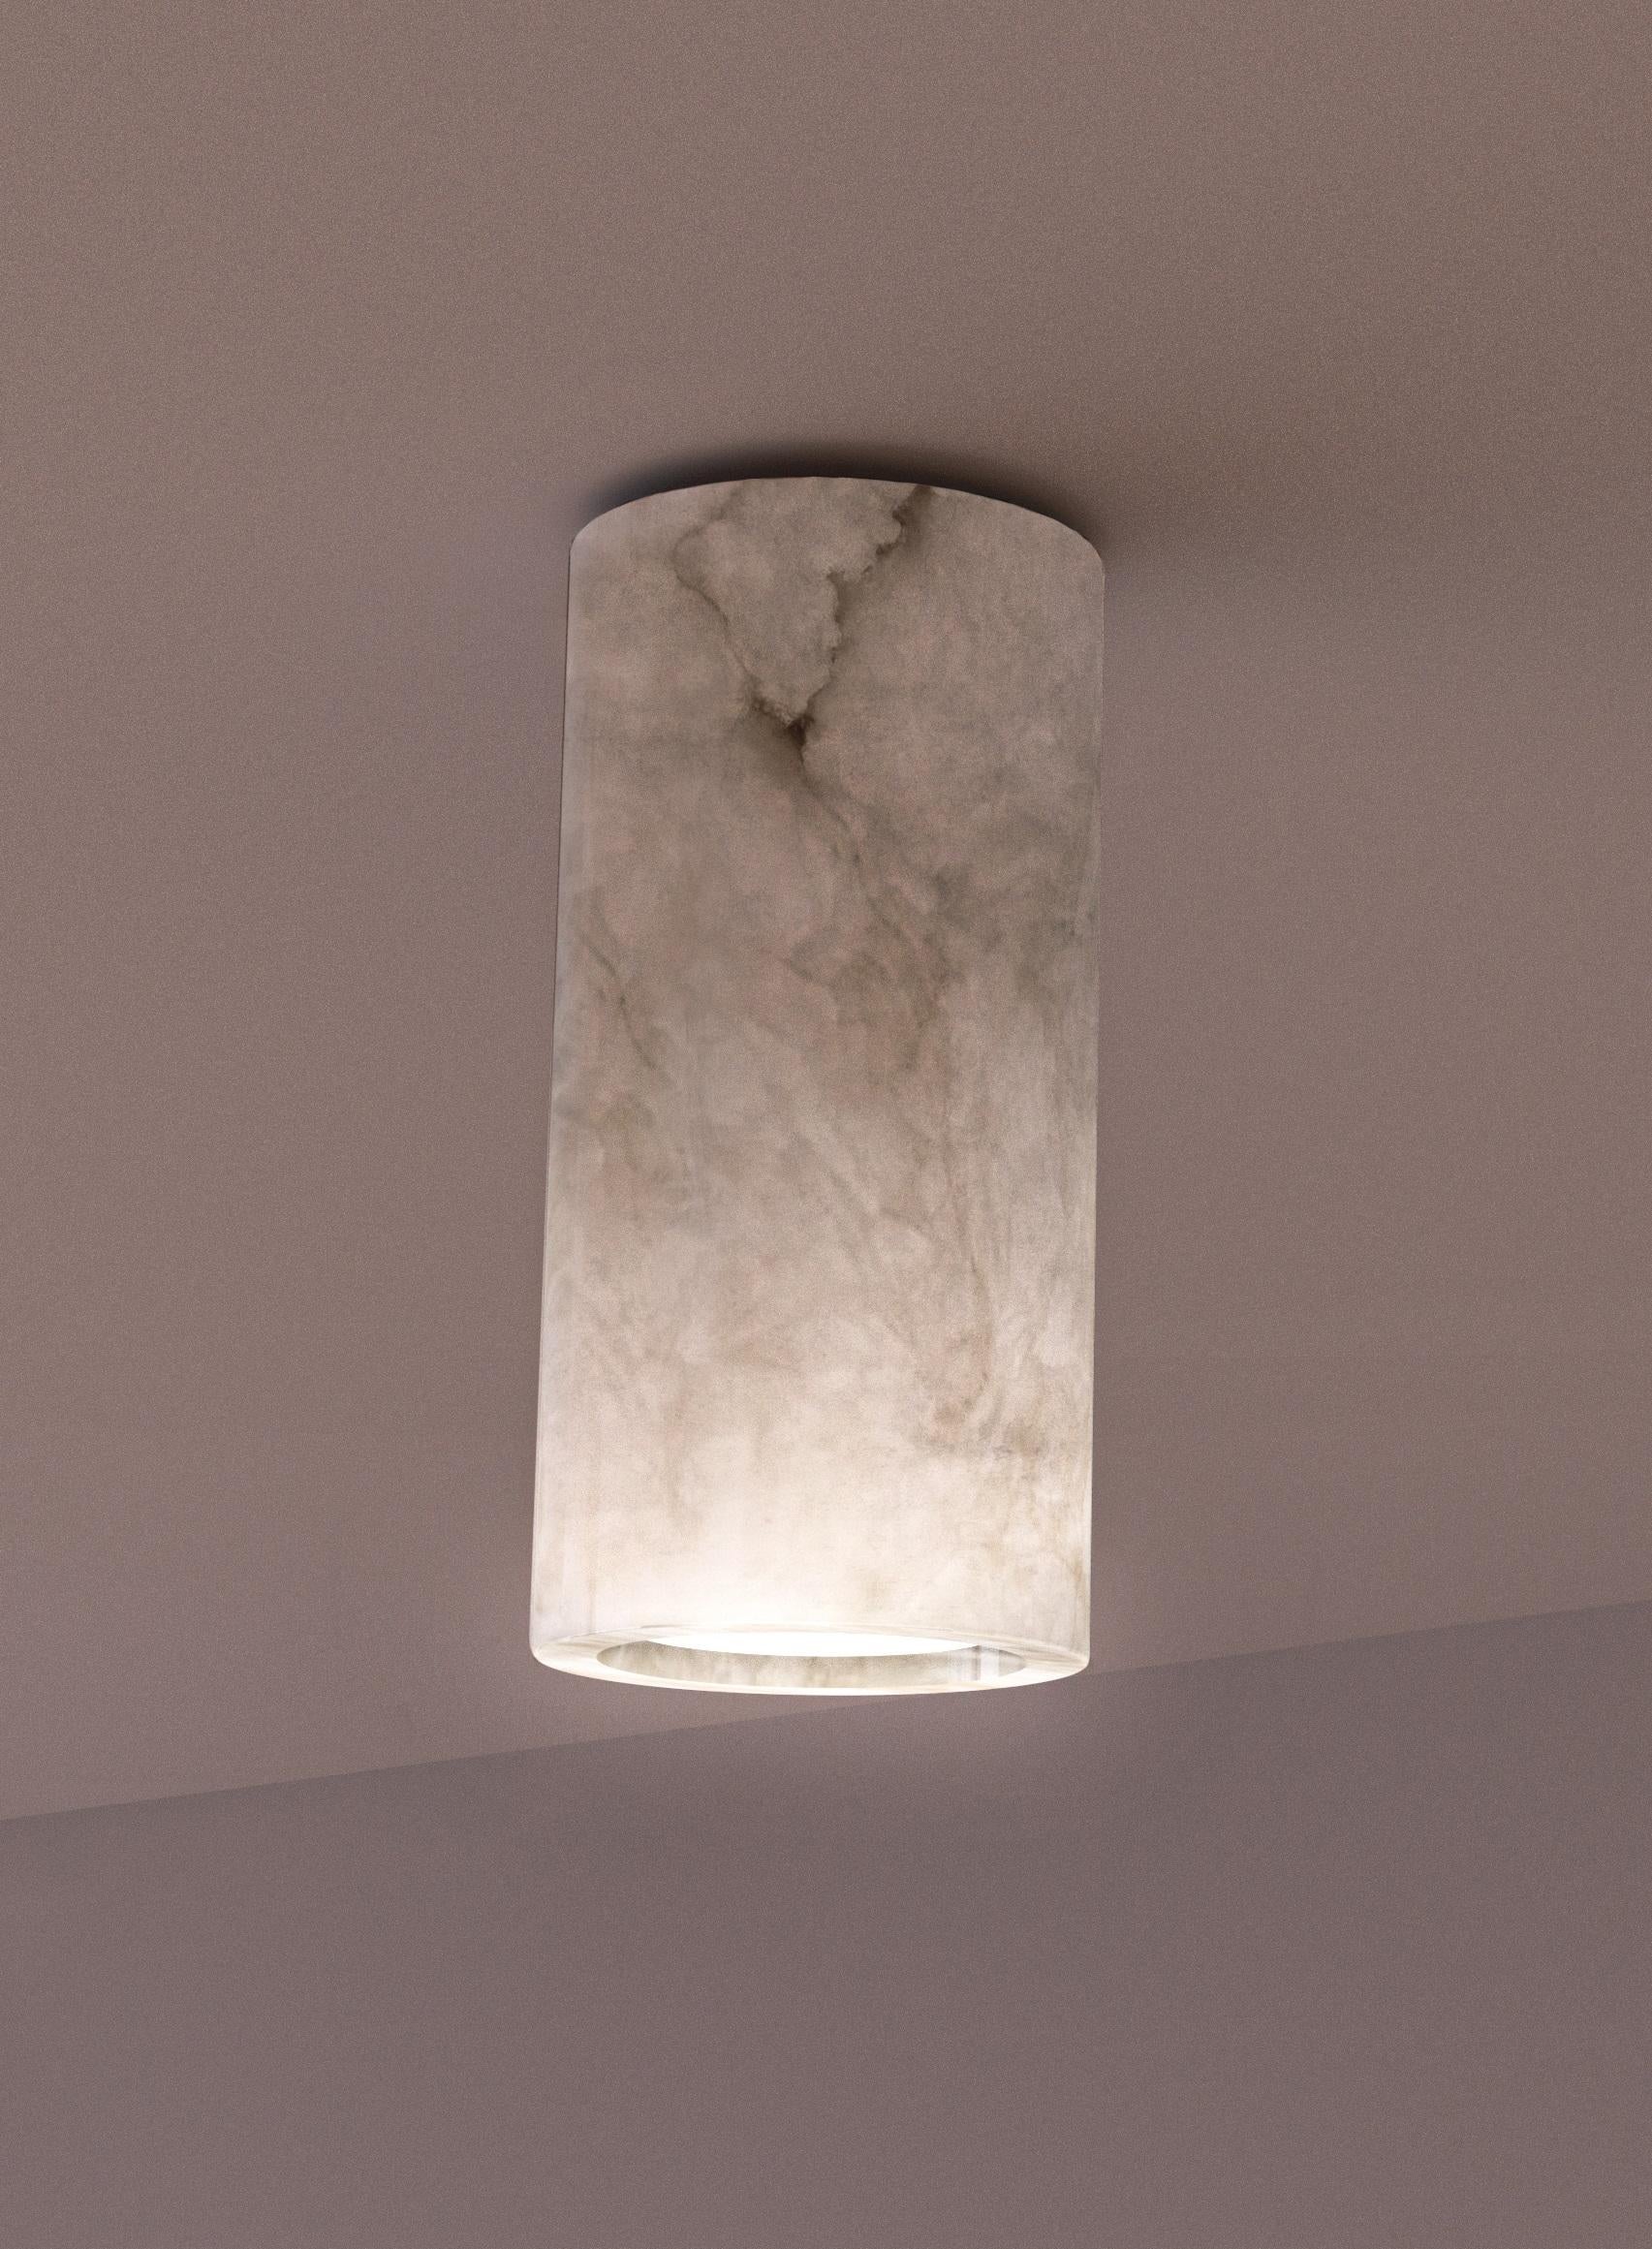 Henka White Alabaster Spotlight by Alabastro Italiano
Dimensions: Ø 7,2 x H 15 cm.
Materials: White alabaster.

Available in white alabaster and iroko wood. Please contact us.

All our lamps can be wired according to each country. If sold to the USA